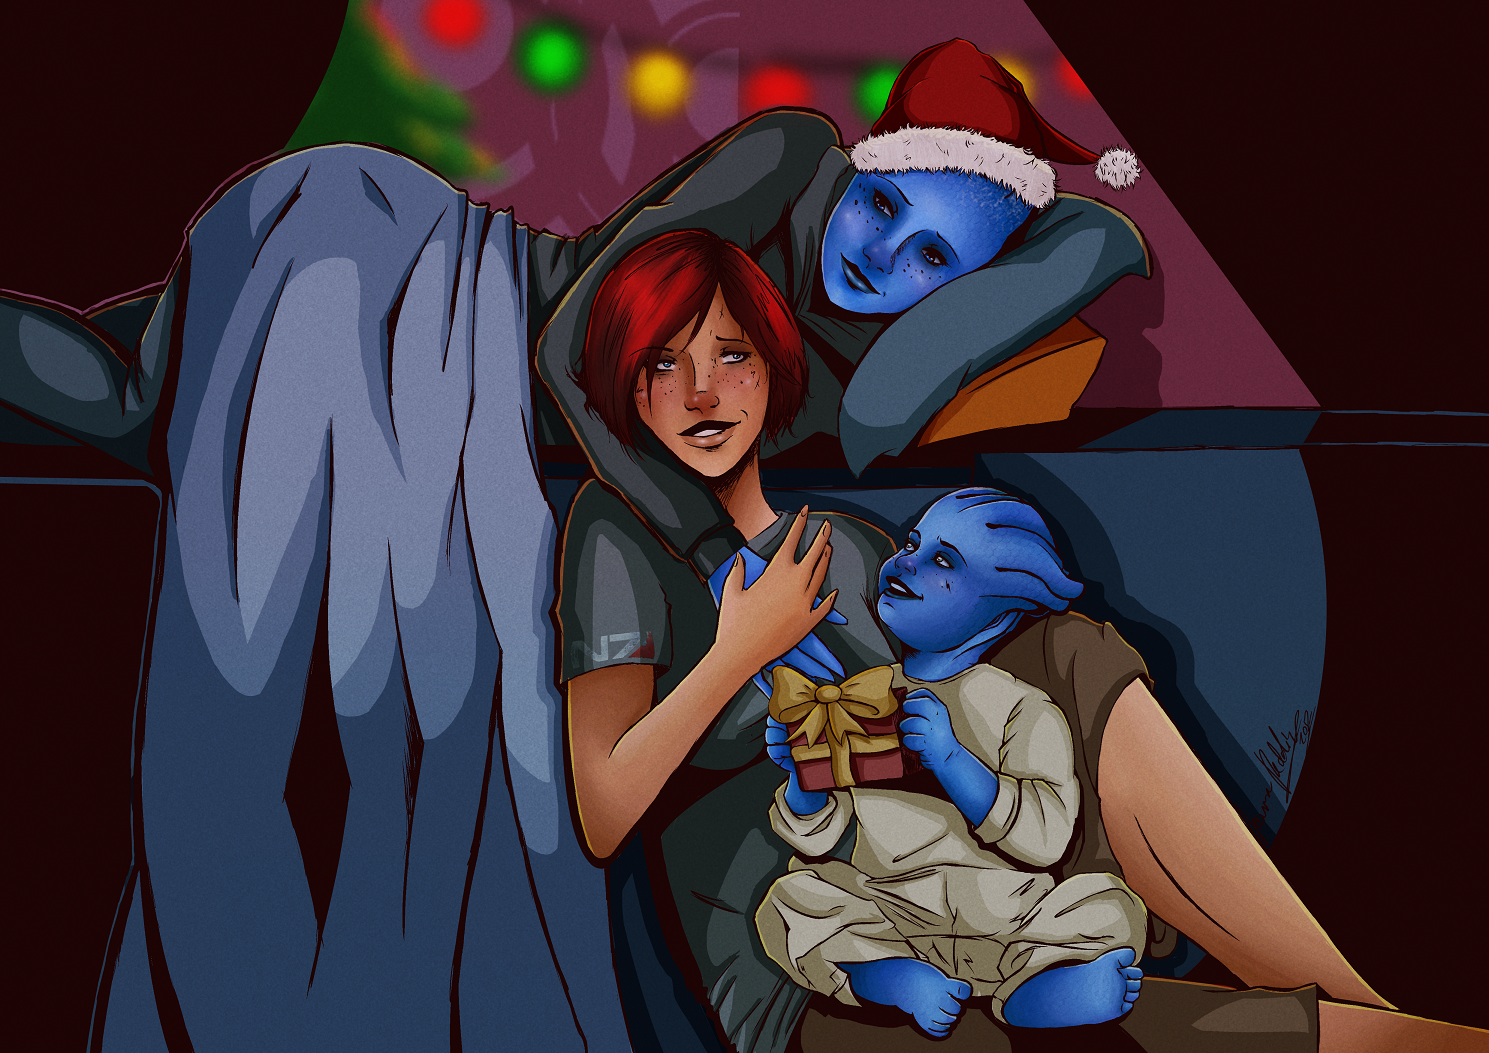 christmas_in_the_family_by_striped_stocking-d5otpri.png